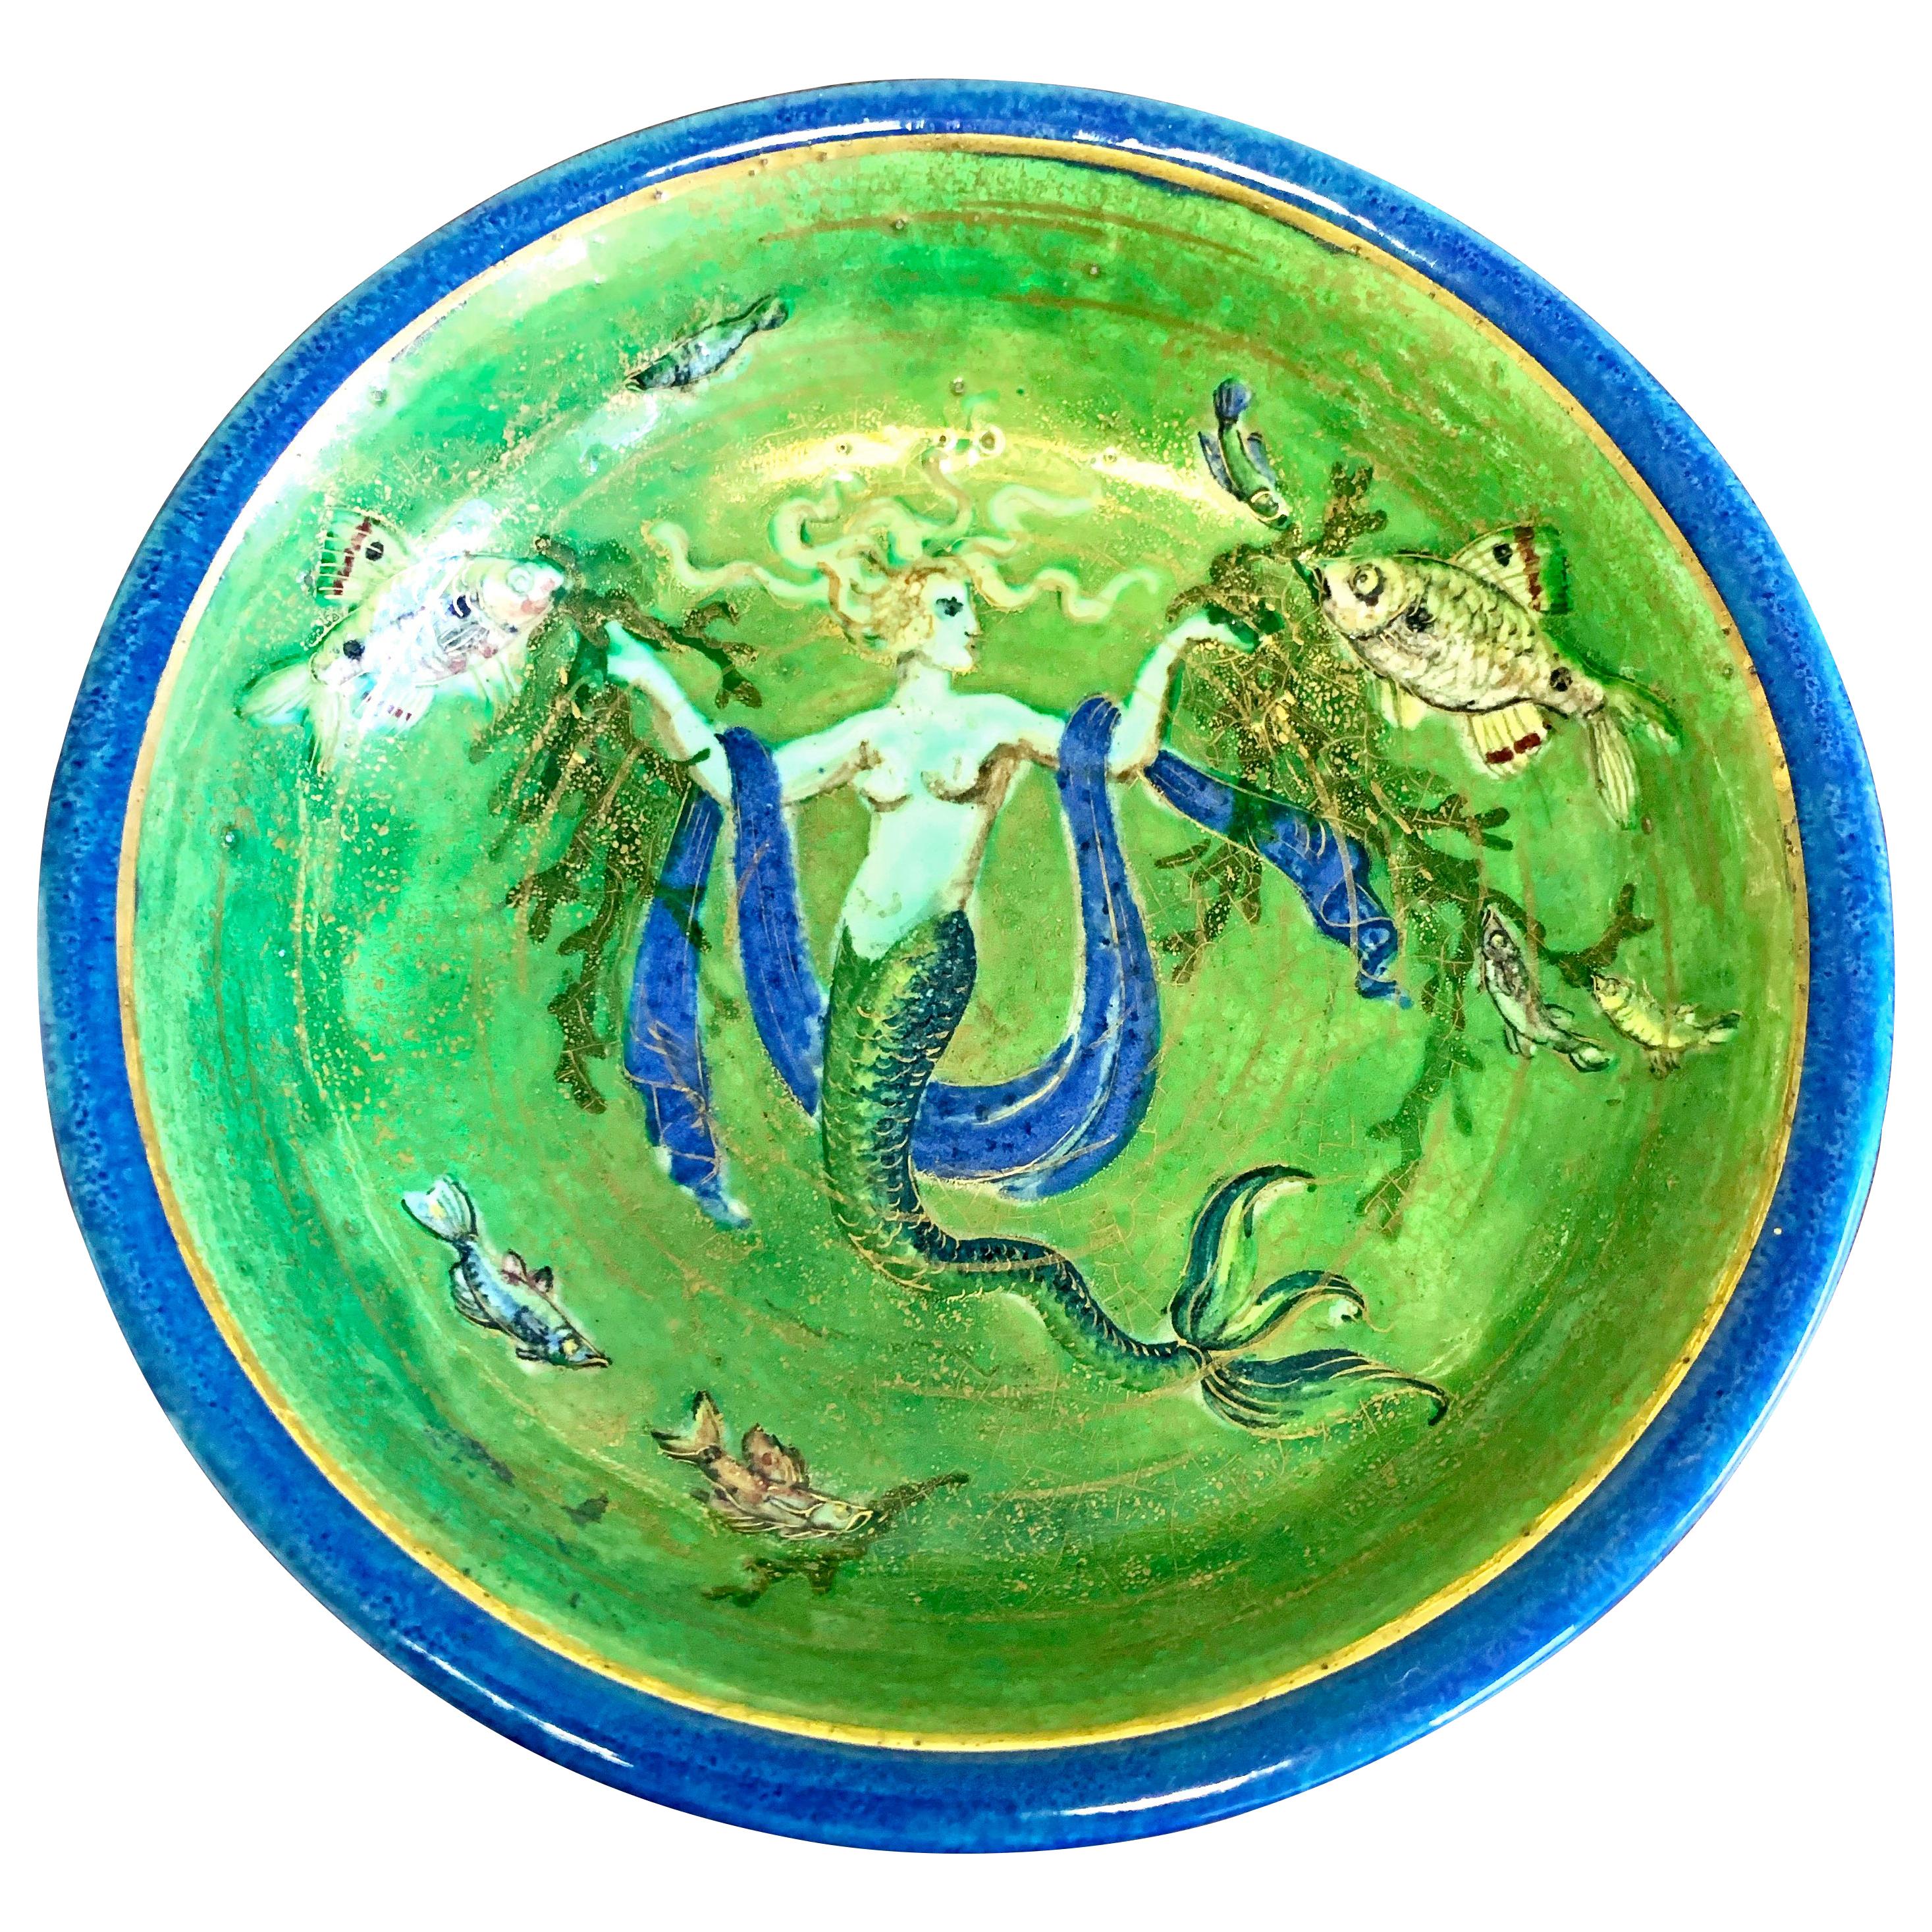 "Mermaid's Reign, " Art Deco Bowl with Underwater Scene in Emerald Green and Gold